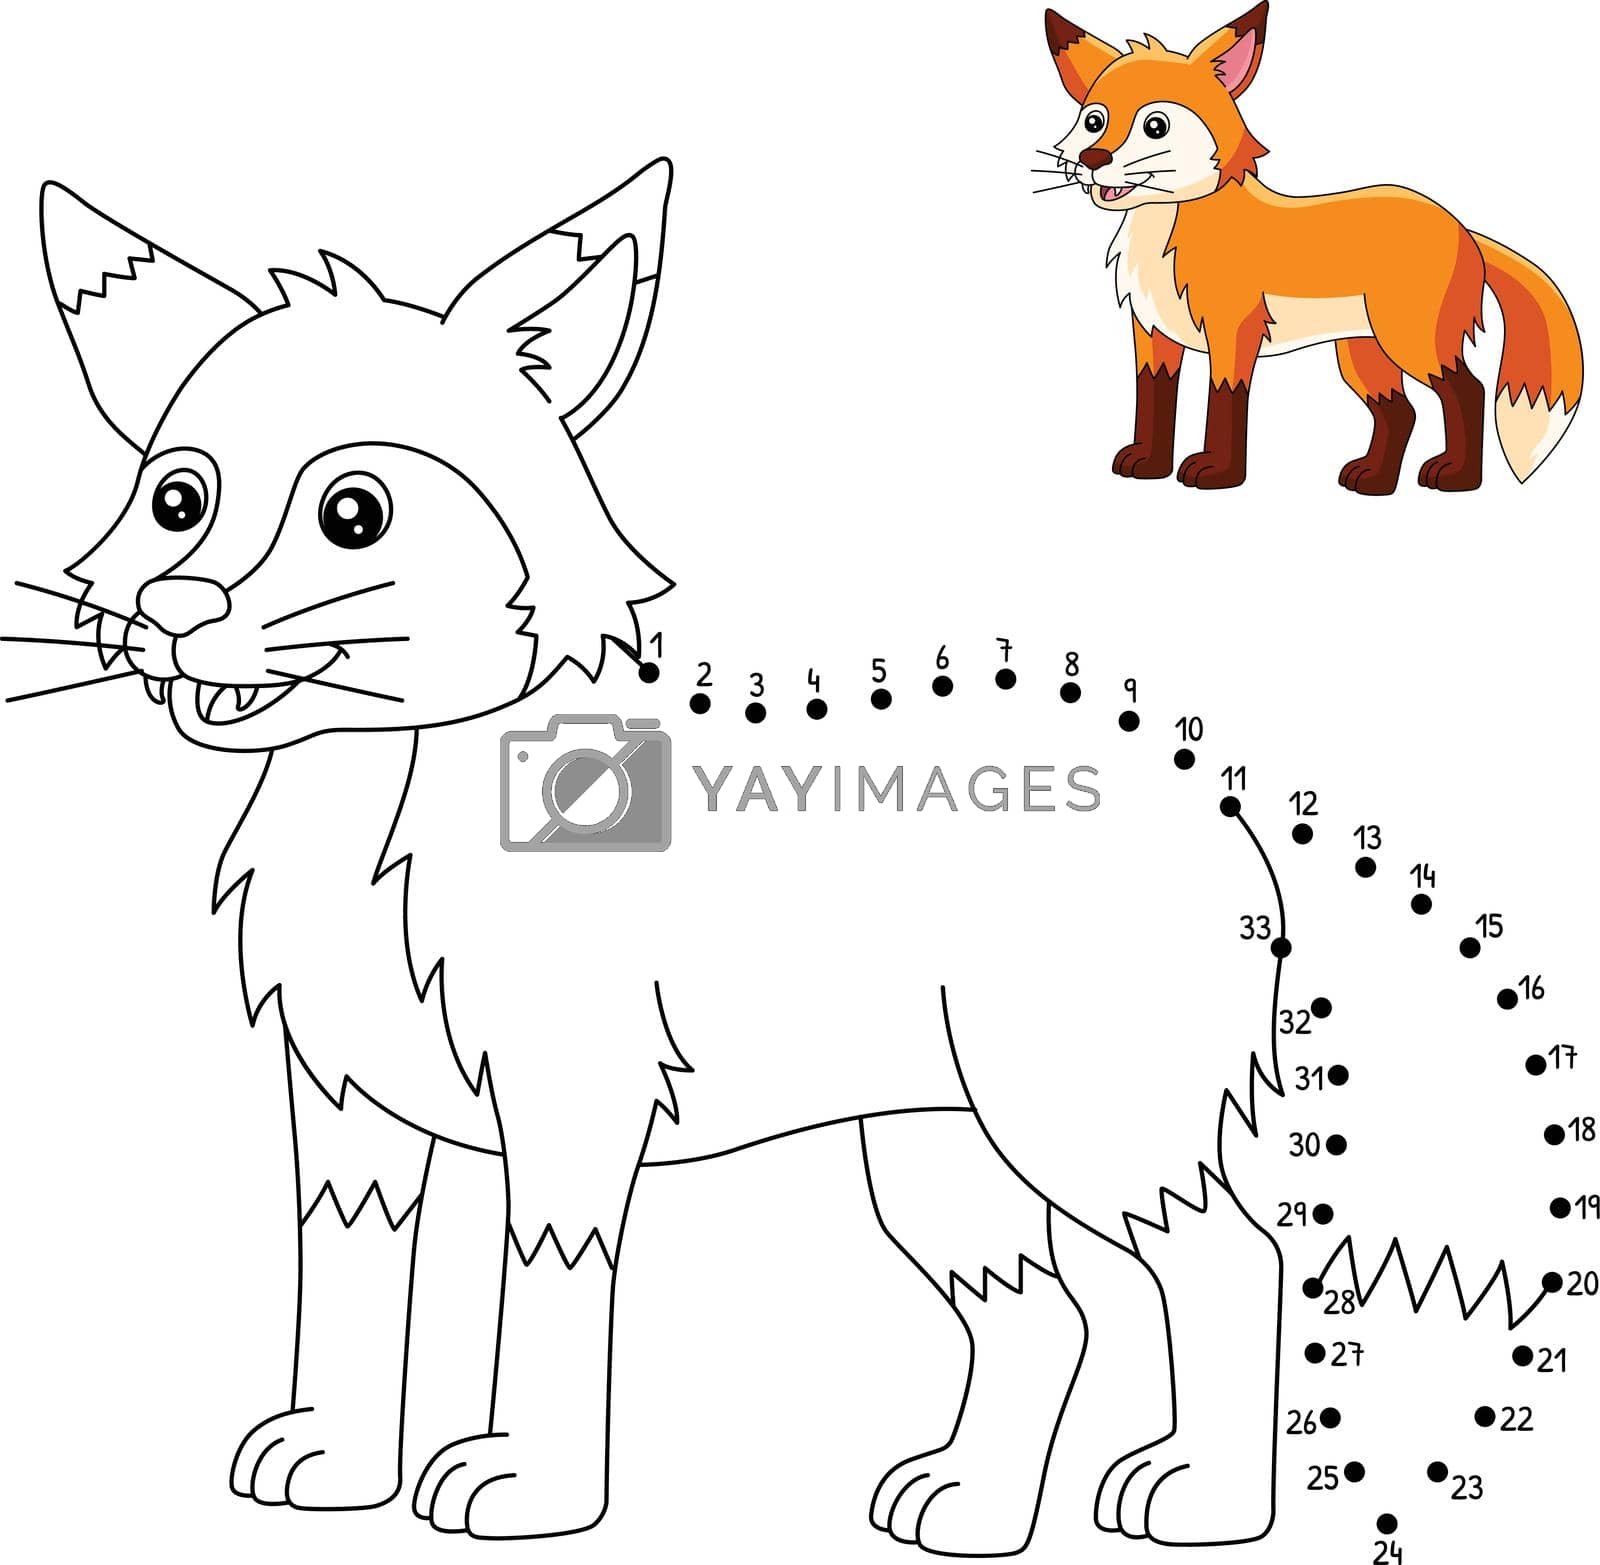 Royalty free image of Dot to Dot Fox Coloring Page for Kids by abbydesign